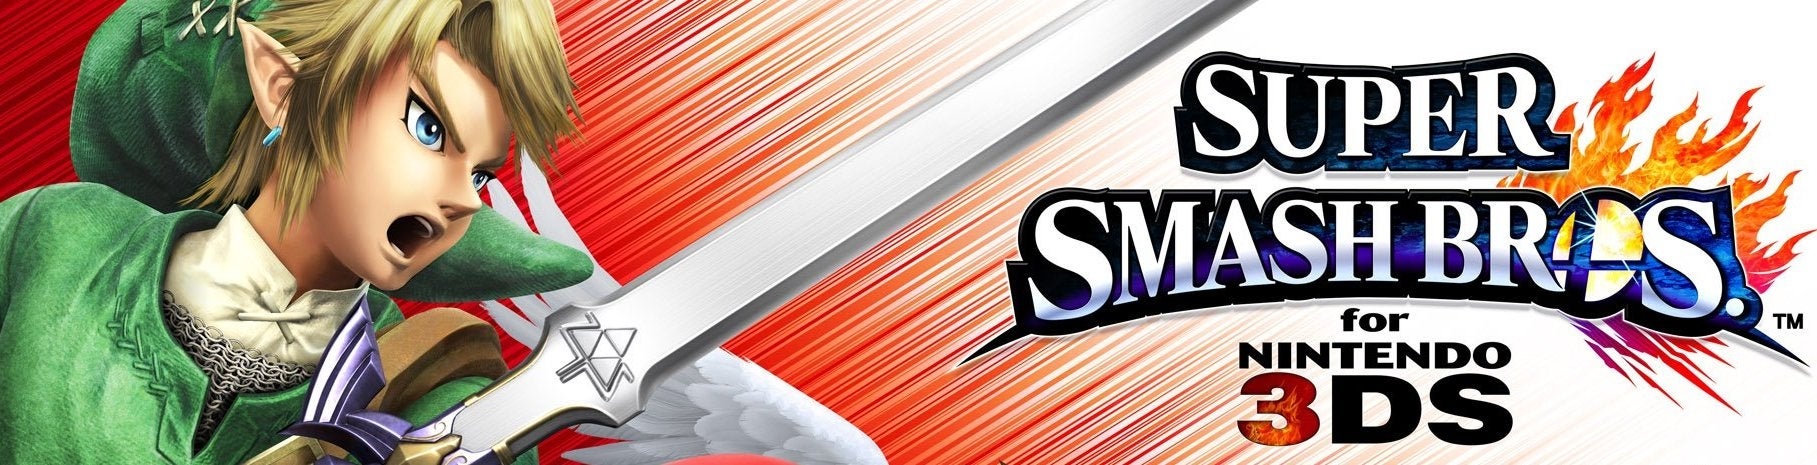 Image for The fighting fan's perspective on 3DS Super Smash Bros.